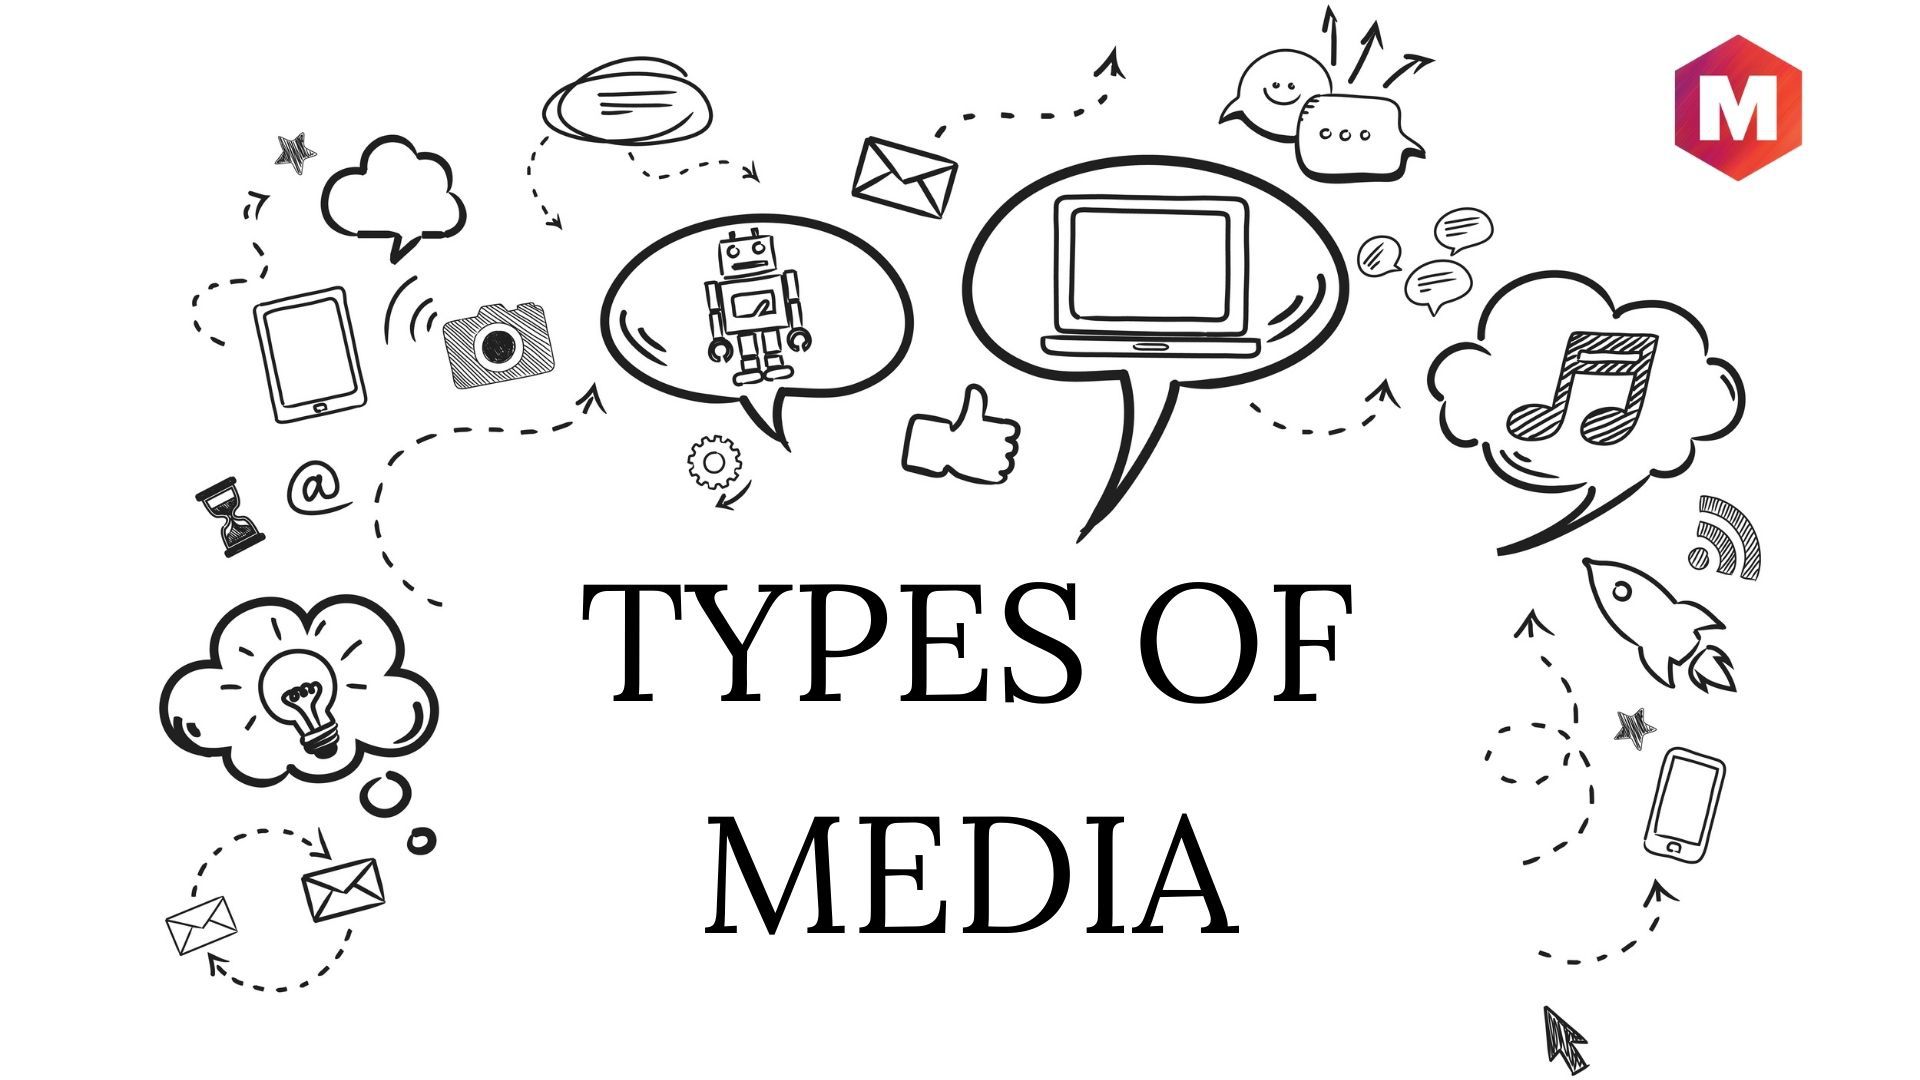 4 Types of Media - Print, Broadcast, Internet and Out of Home | Marketing91